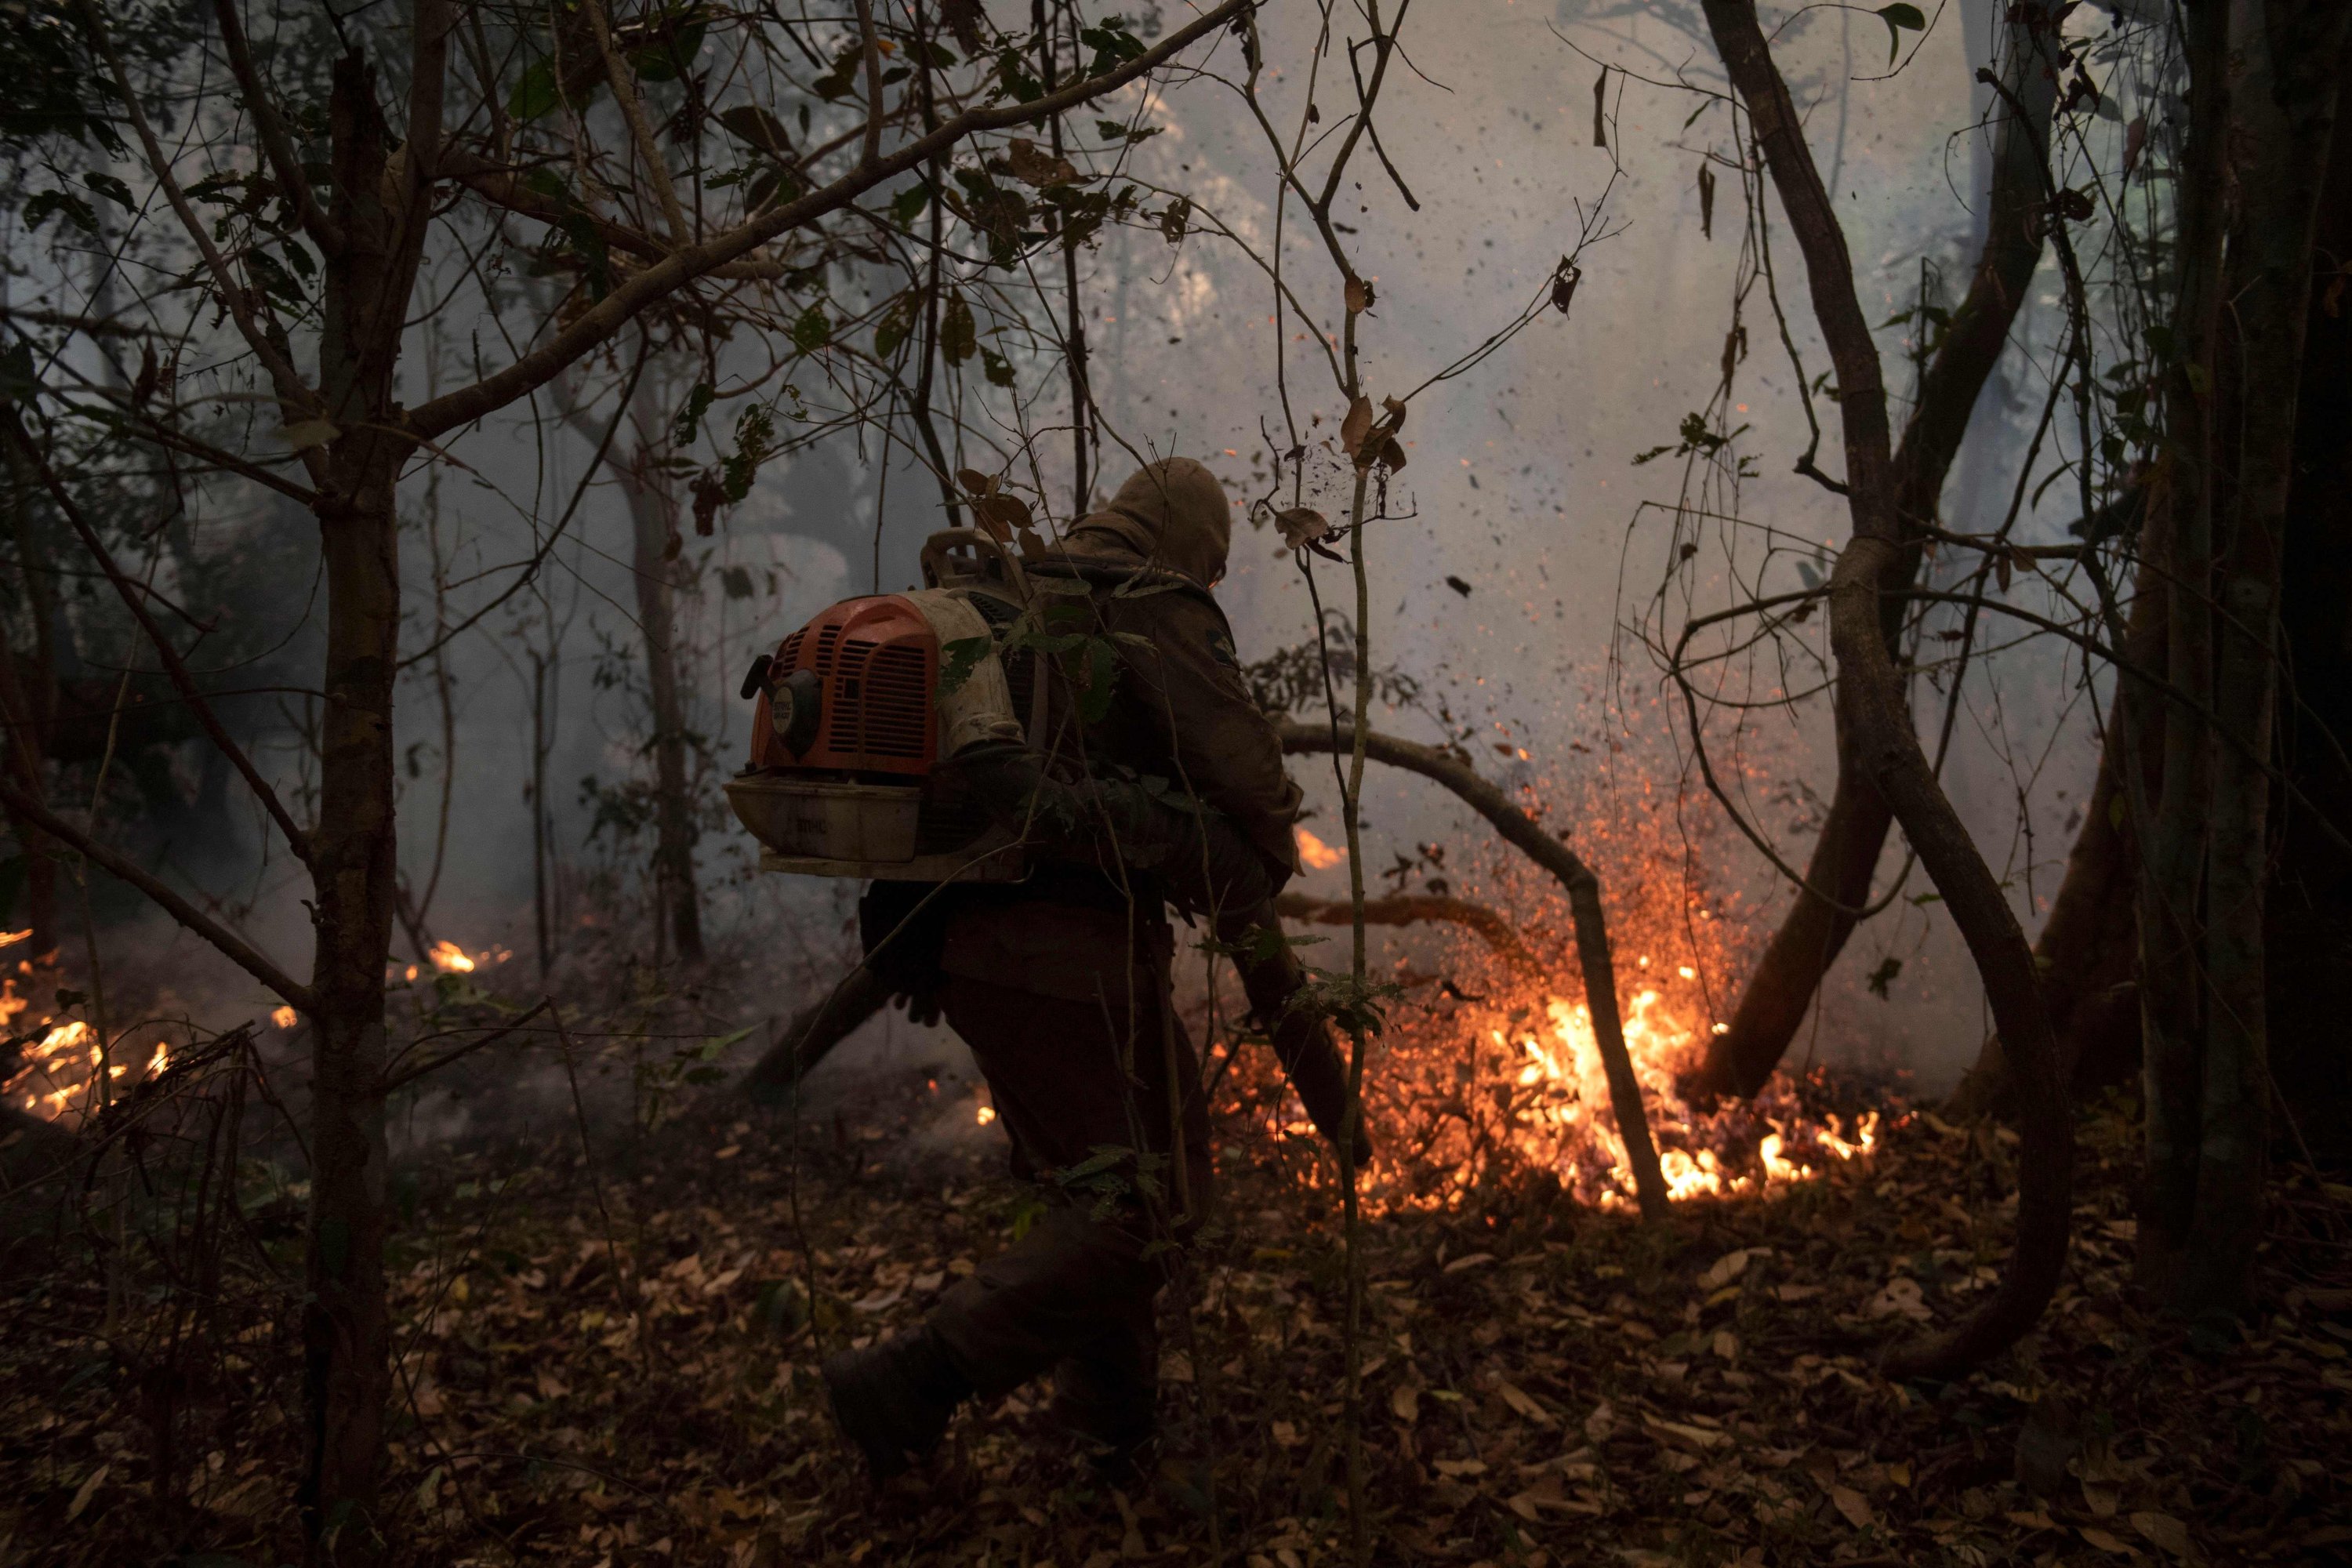 Firefighters from the Mato Grosso State Department work to put out a wildfire in the Porto Jofre region in the wetlands of the Pantanal near Transpantaneira road in Mato Grosso state, Brazil, Sept. 14, 2020. (AFP Photo)